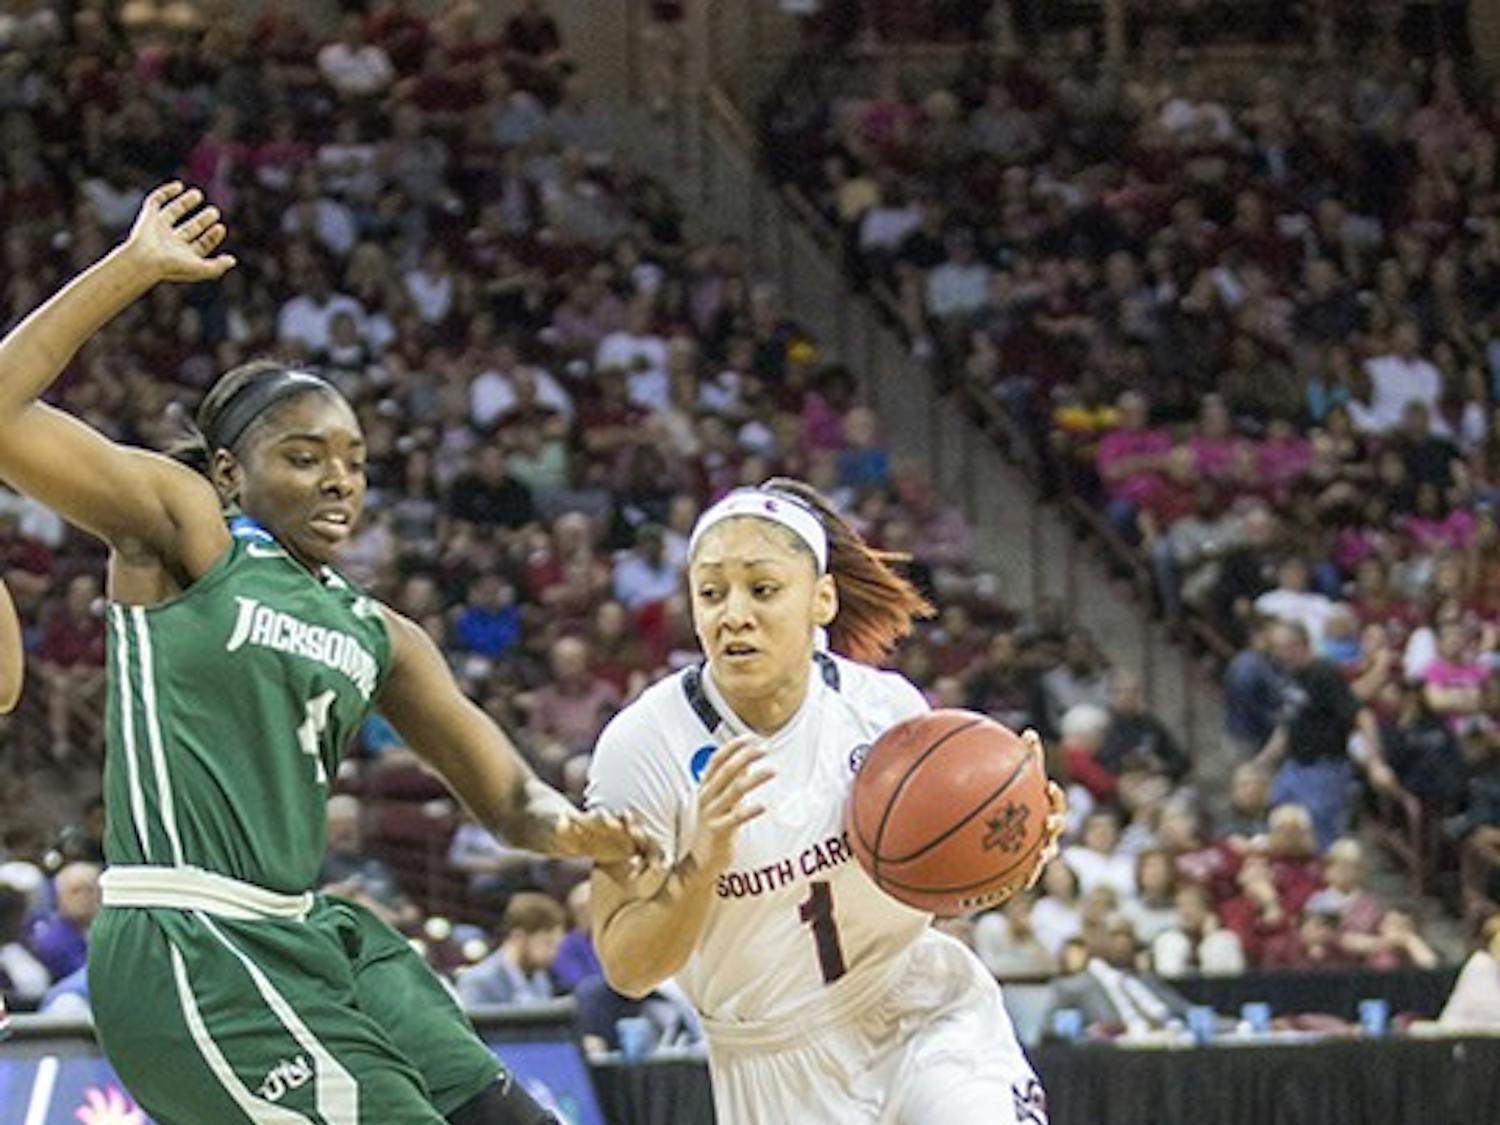 Women's basketball faced Jacksonville University in the first round of the 2016 NCAAW Tournament on Friday, March 18. Final score: South Carolina 77, Jacksonville 41. Gamecocks will play Kansas State at CLA at 7 p.m. Sunday, March 20. 